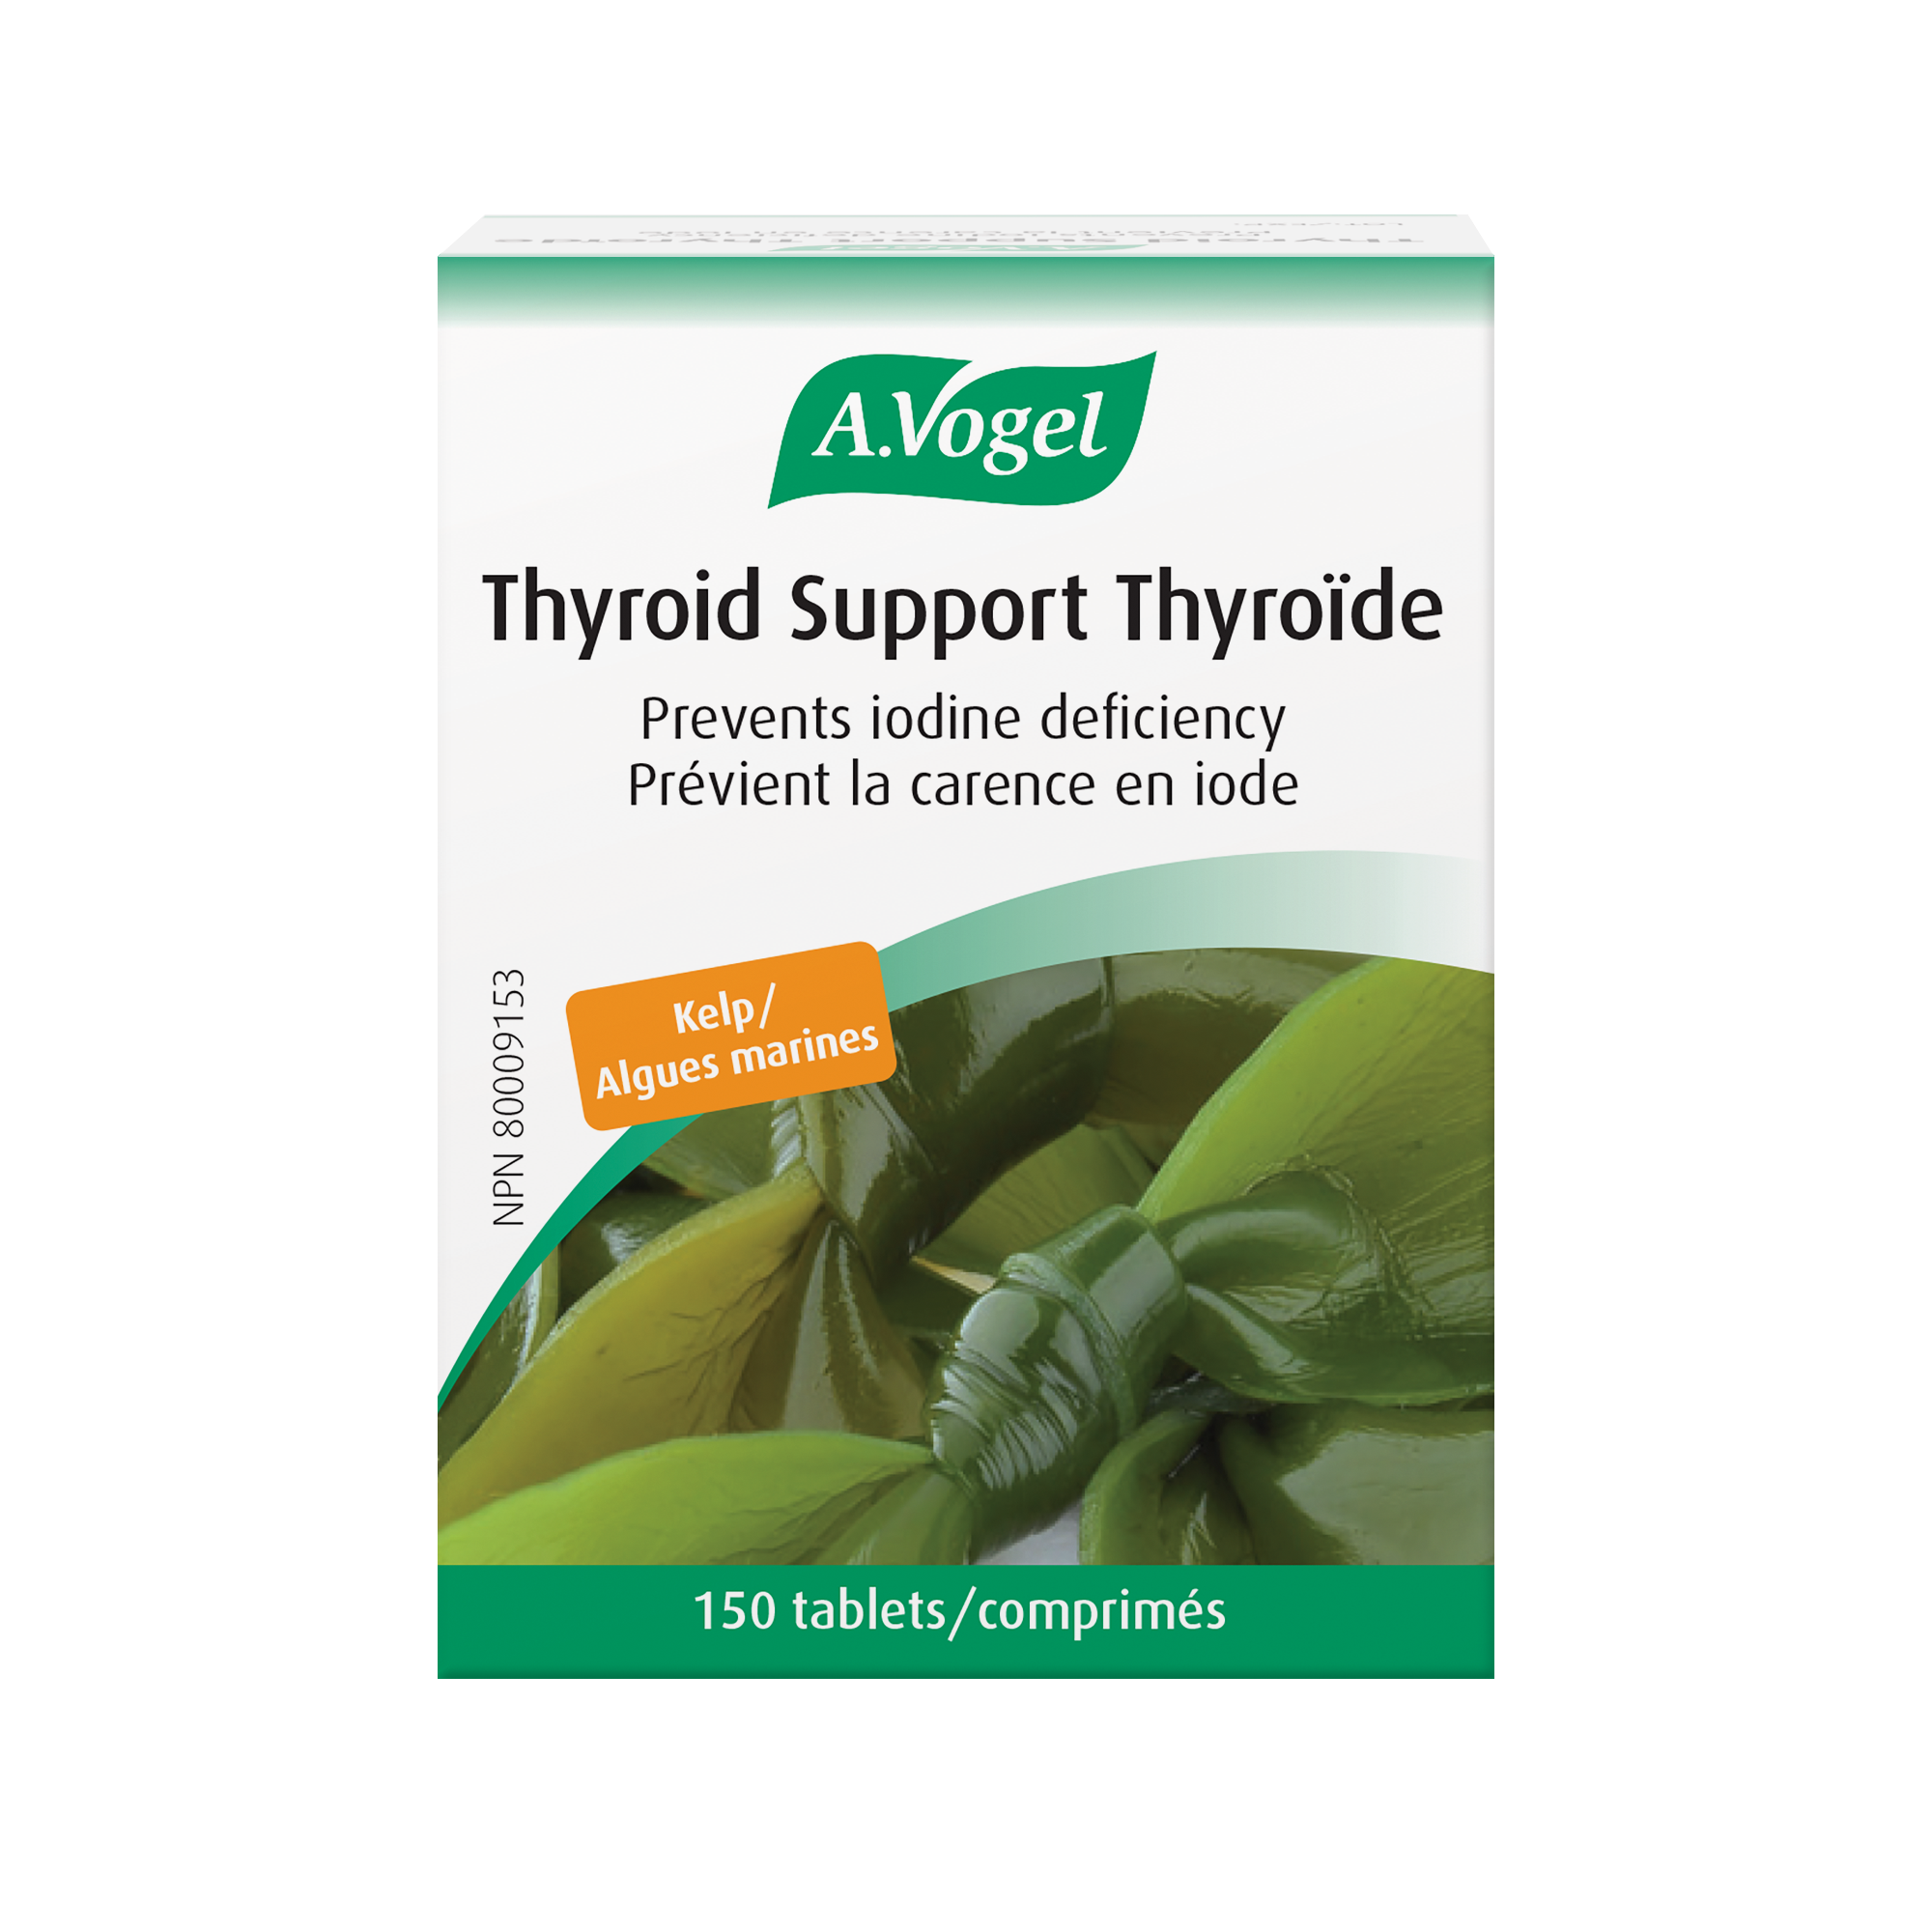 A. Vogel Thyroid Support 150 Tablets